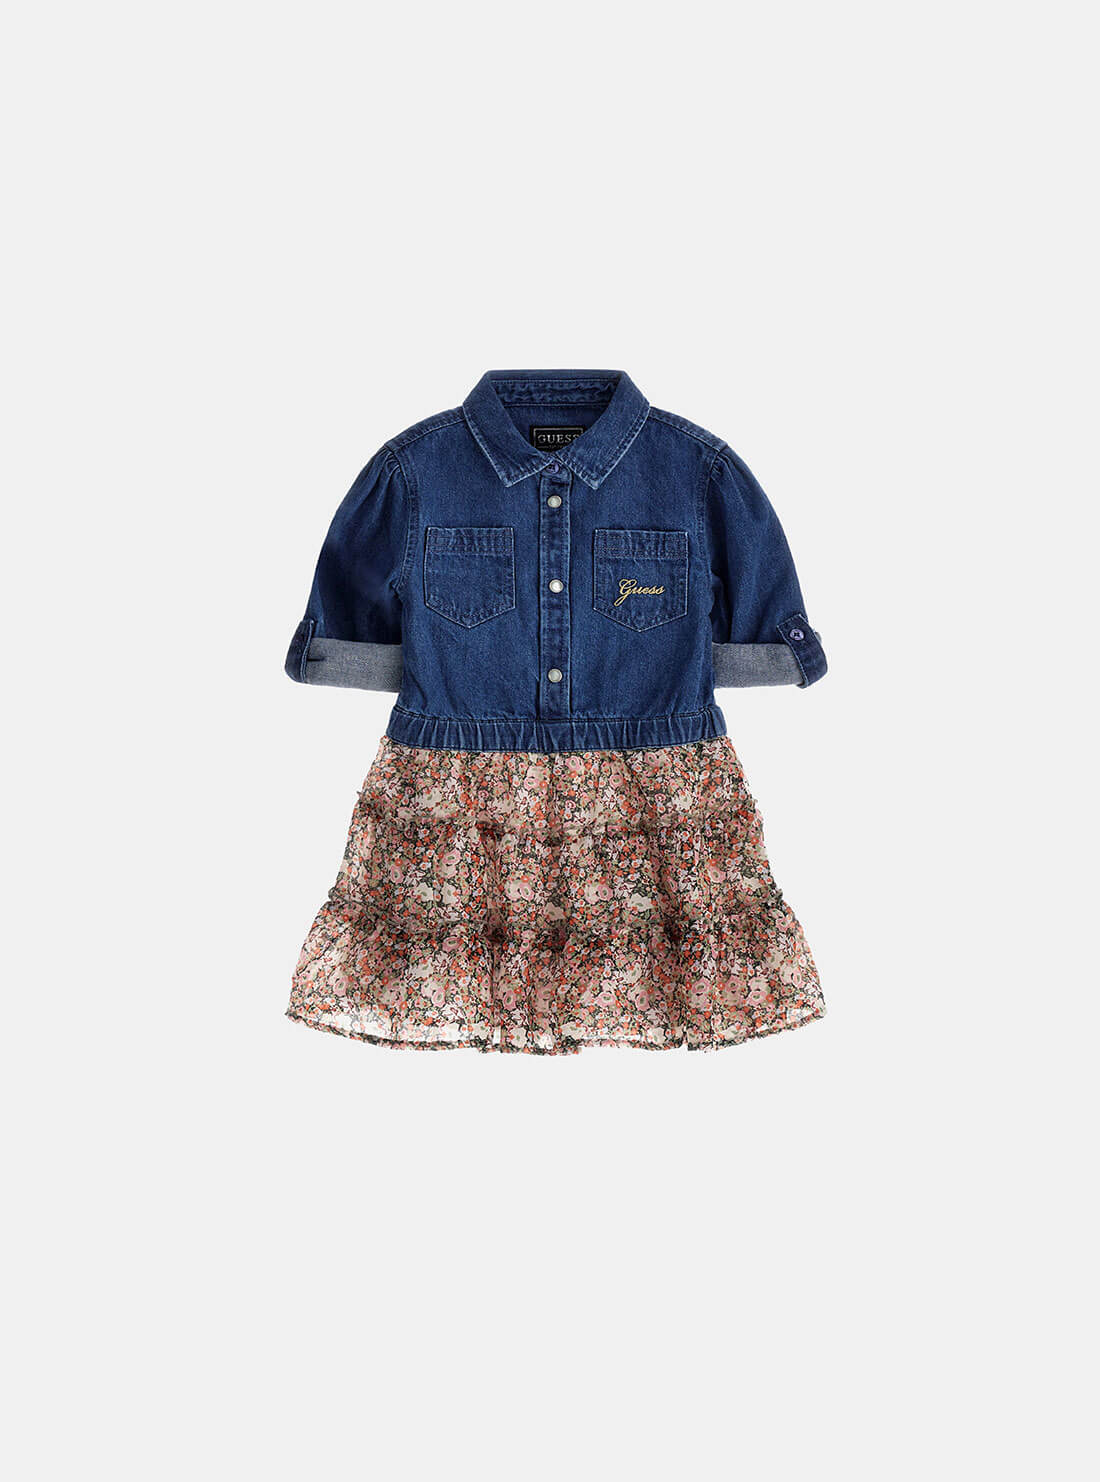 Blue Denim and Floral Print Dress (2-7) | GUESS Kids | front view